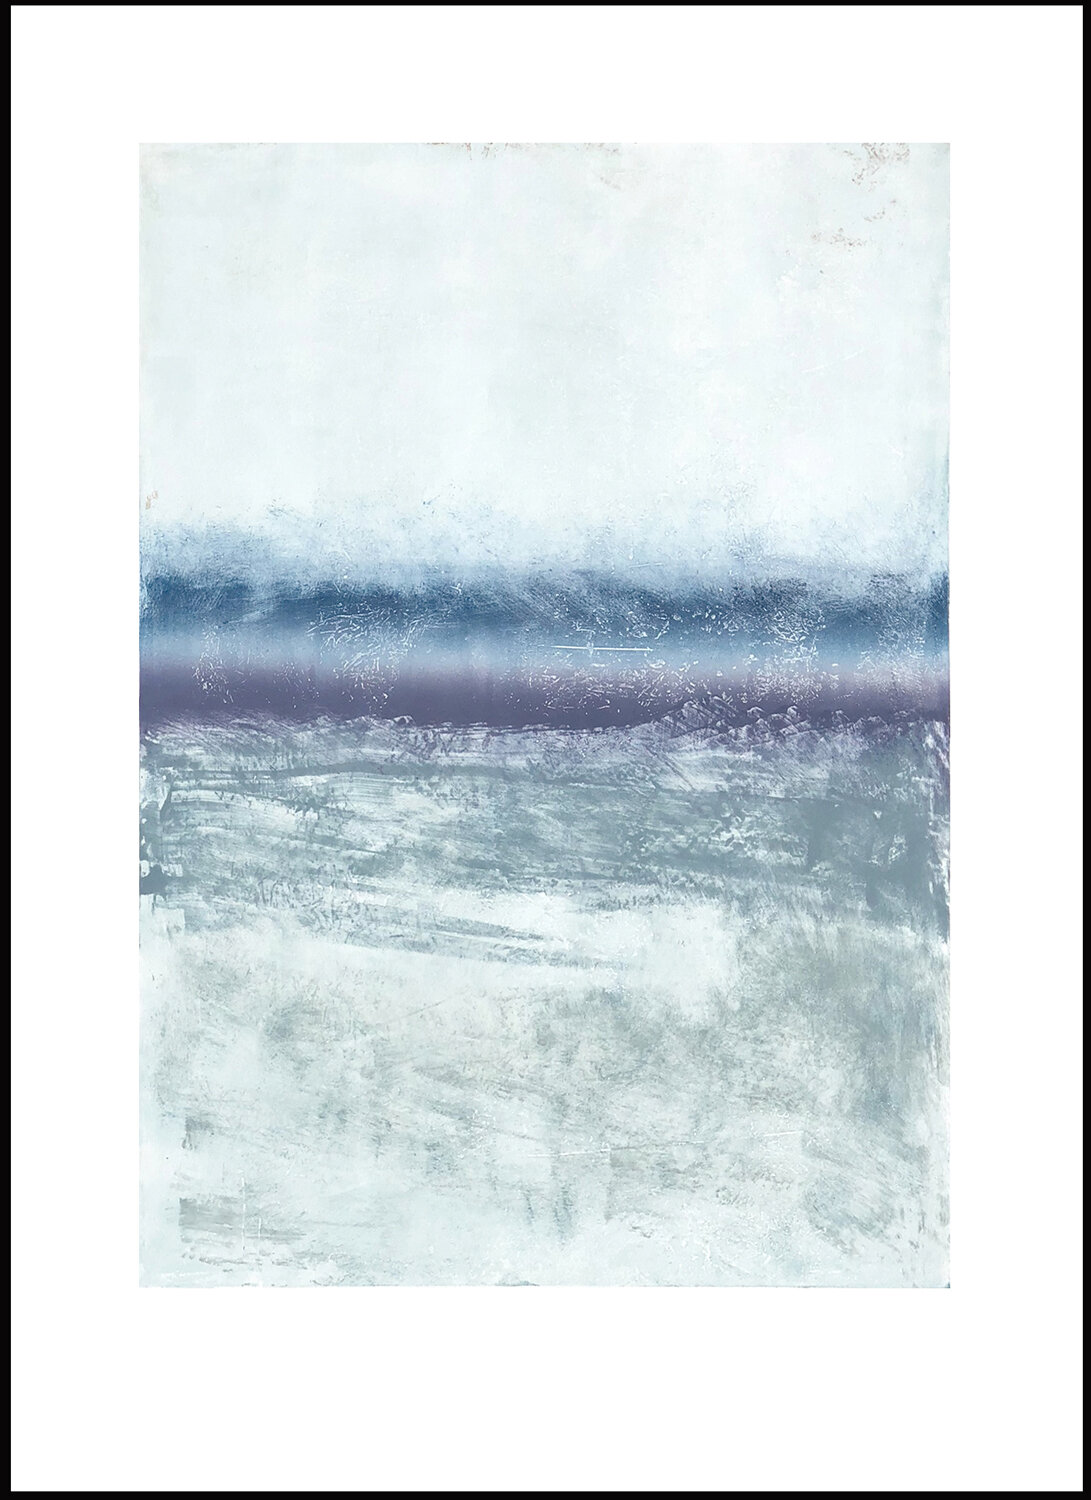    “In the Stillness of the Quiet   “ In the stillness of the quiet, if we listen, we can hear the whisper of the heart giving strength to weakness, courage to fear, hope to despair.” Howard Thurman  Monotype, 34 x ~25 inches , 1/1   $545   